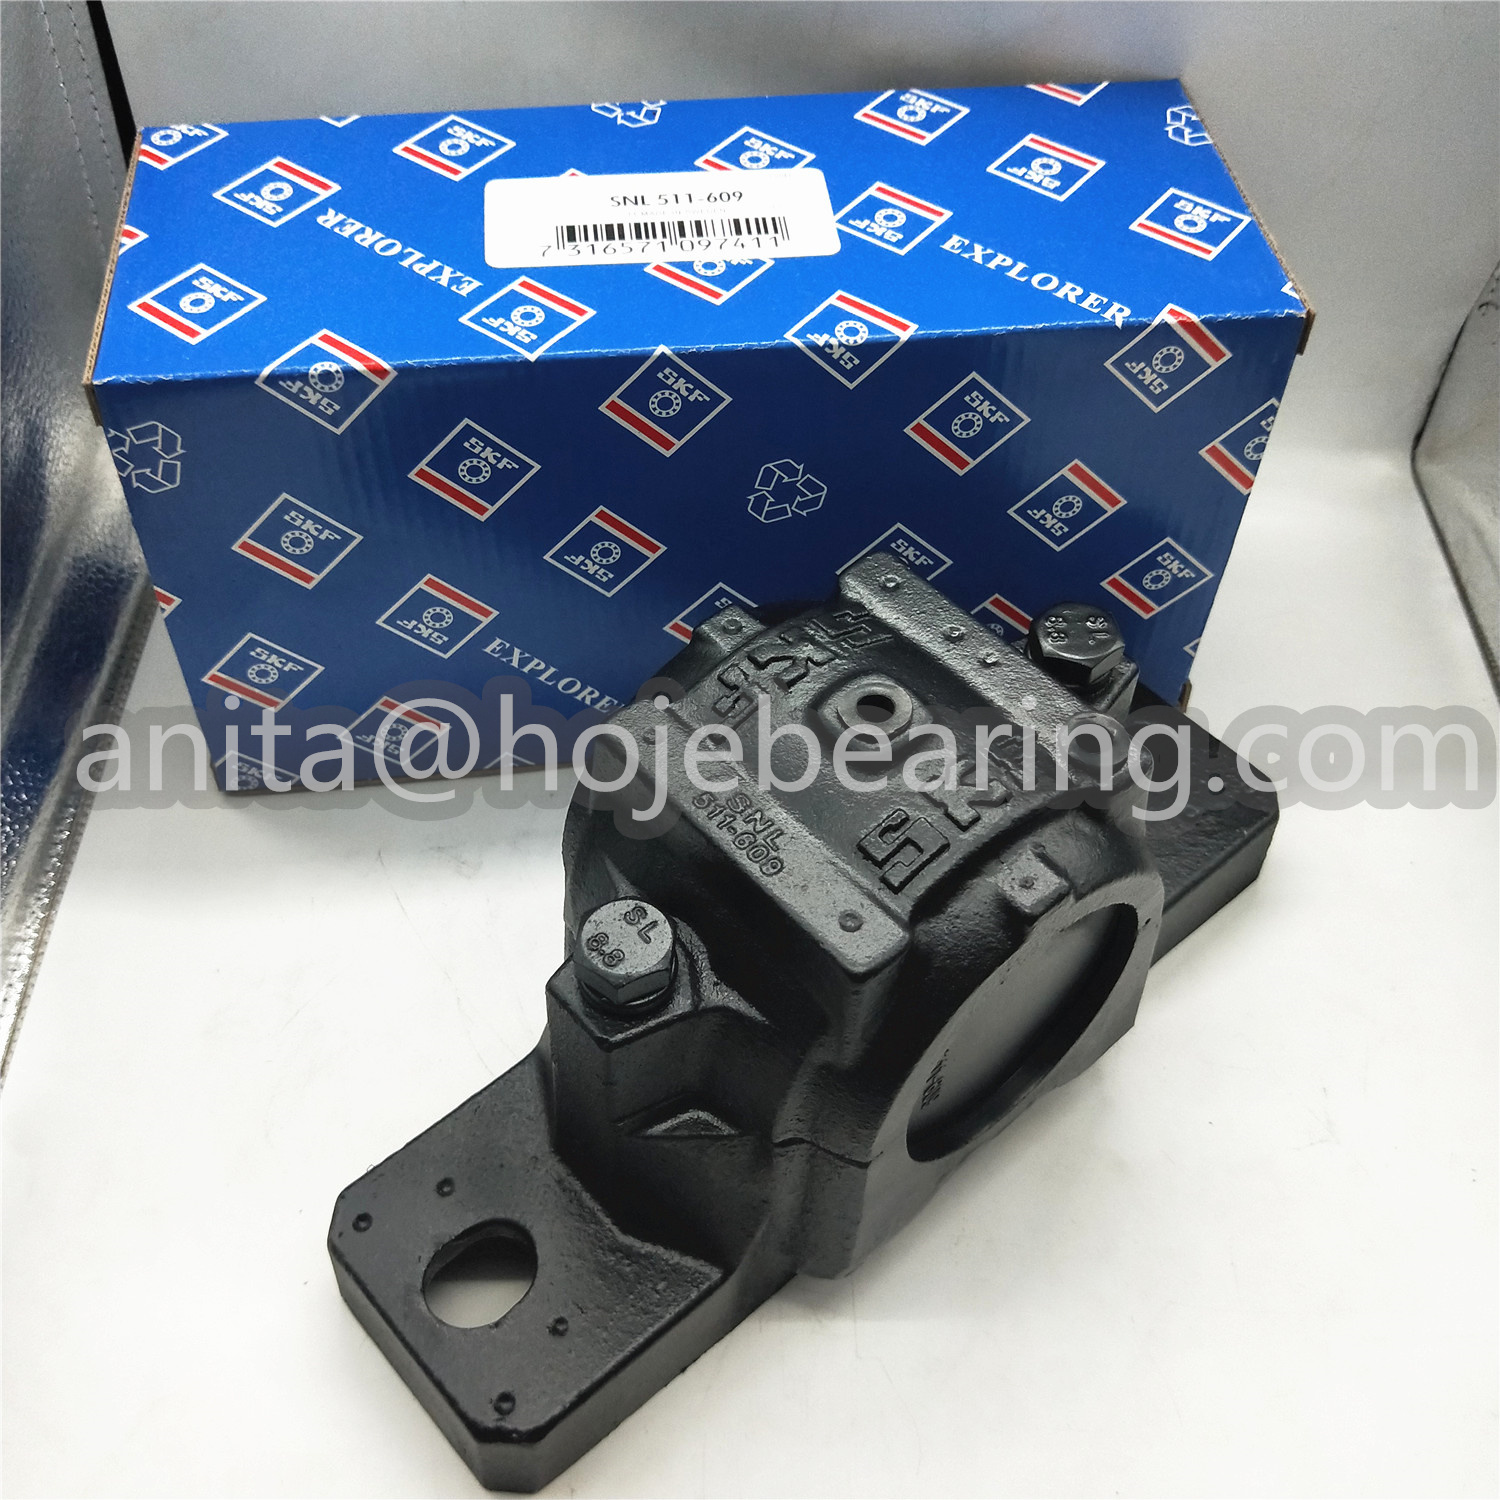 SNL 511-609 SNL plummer block housings for bearings with a cylindrical bore, with standard seals